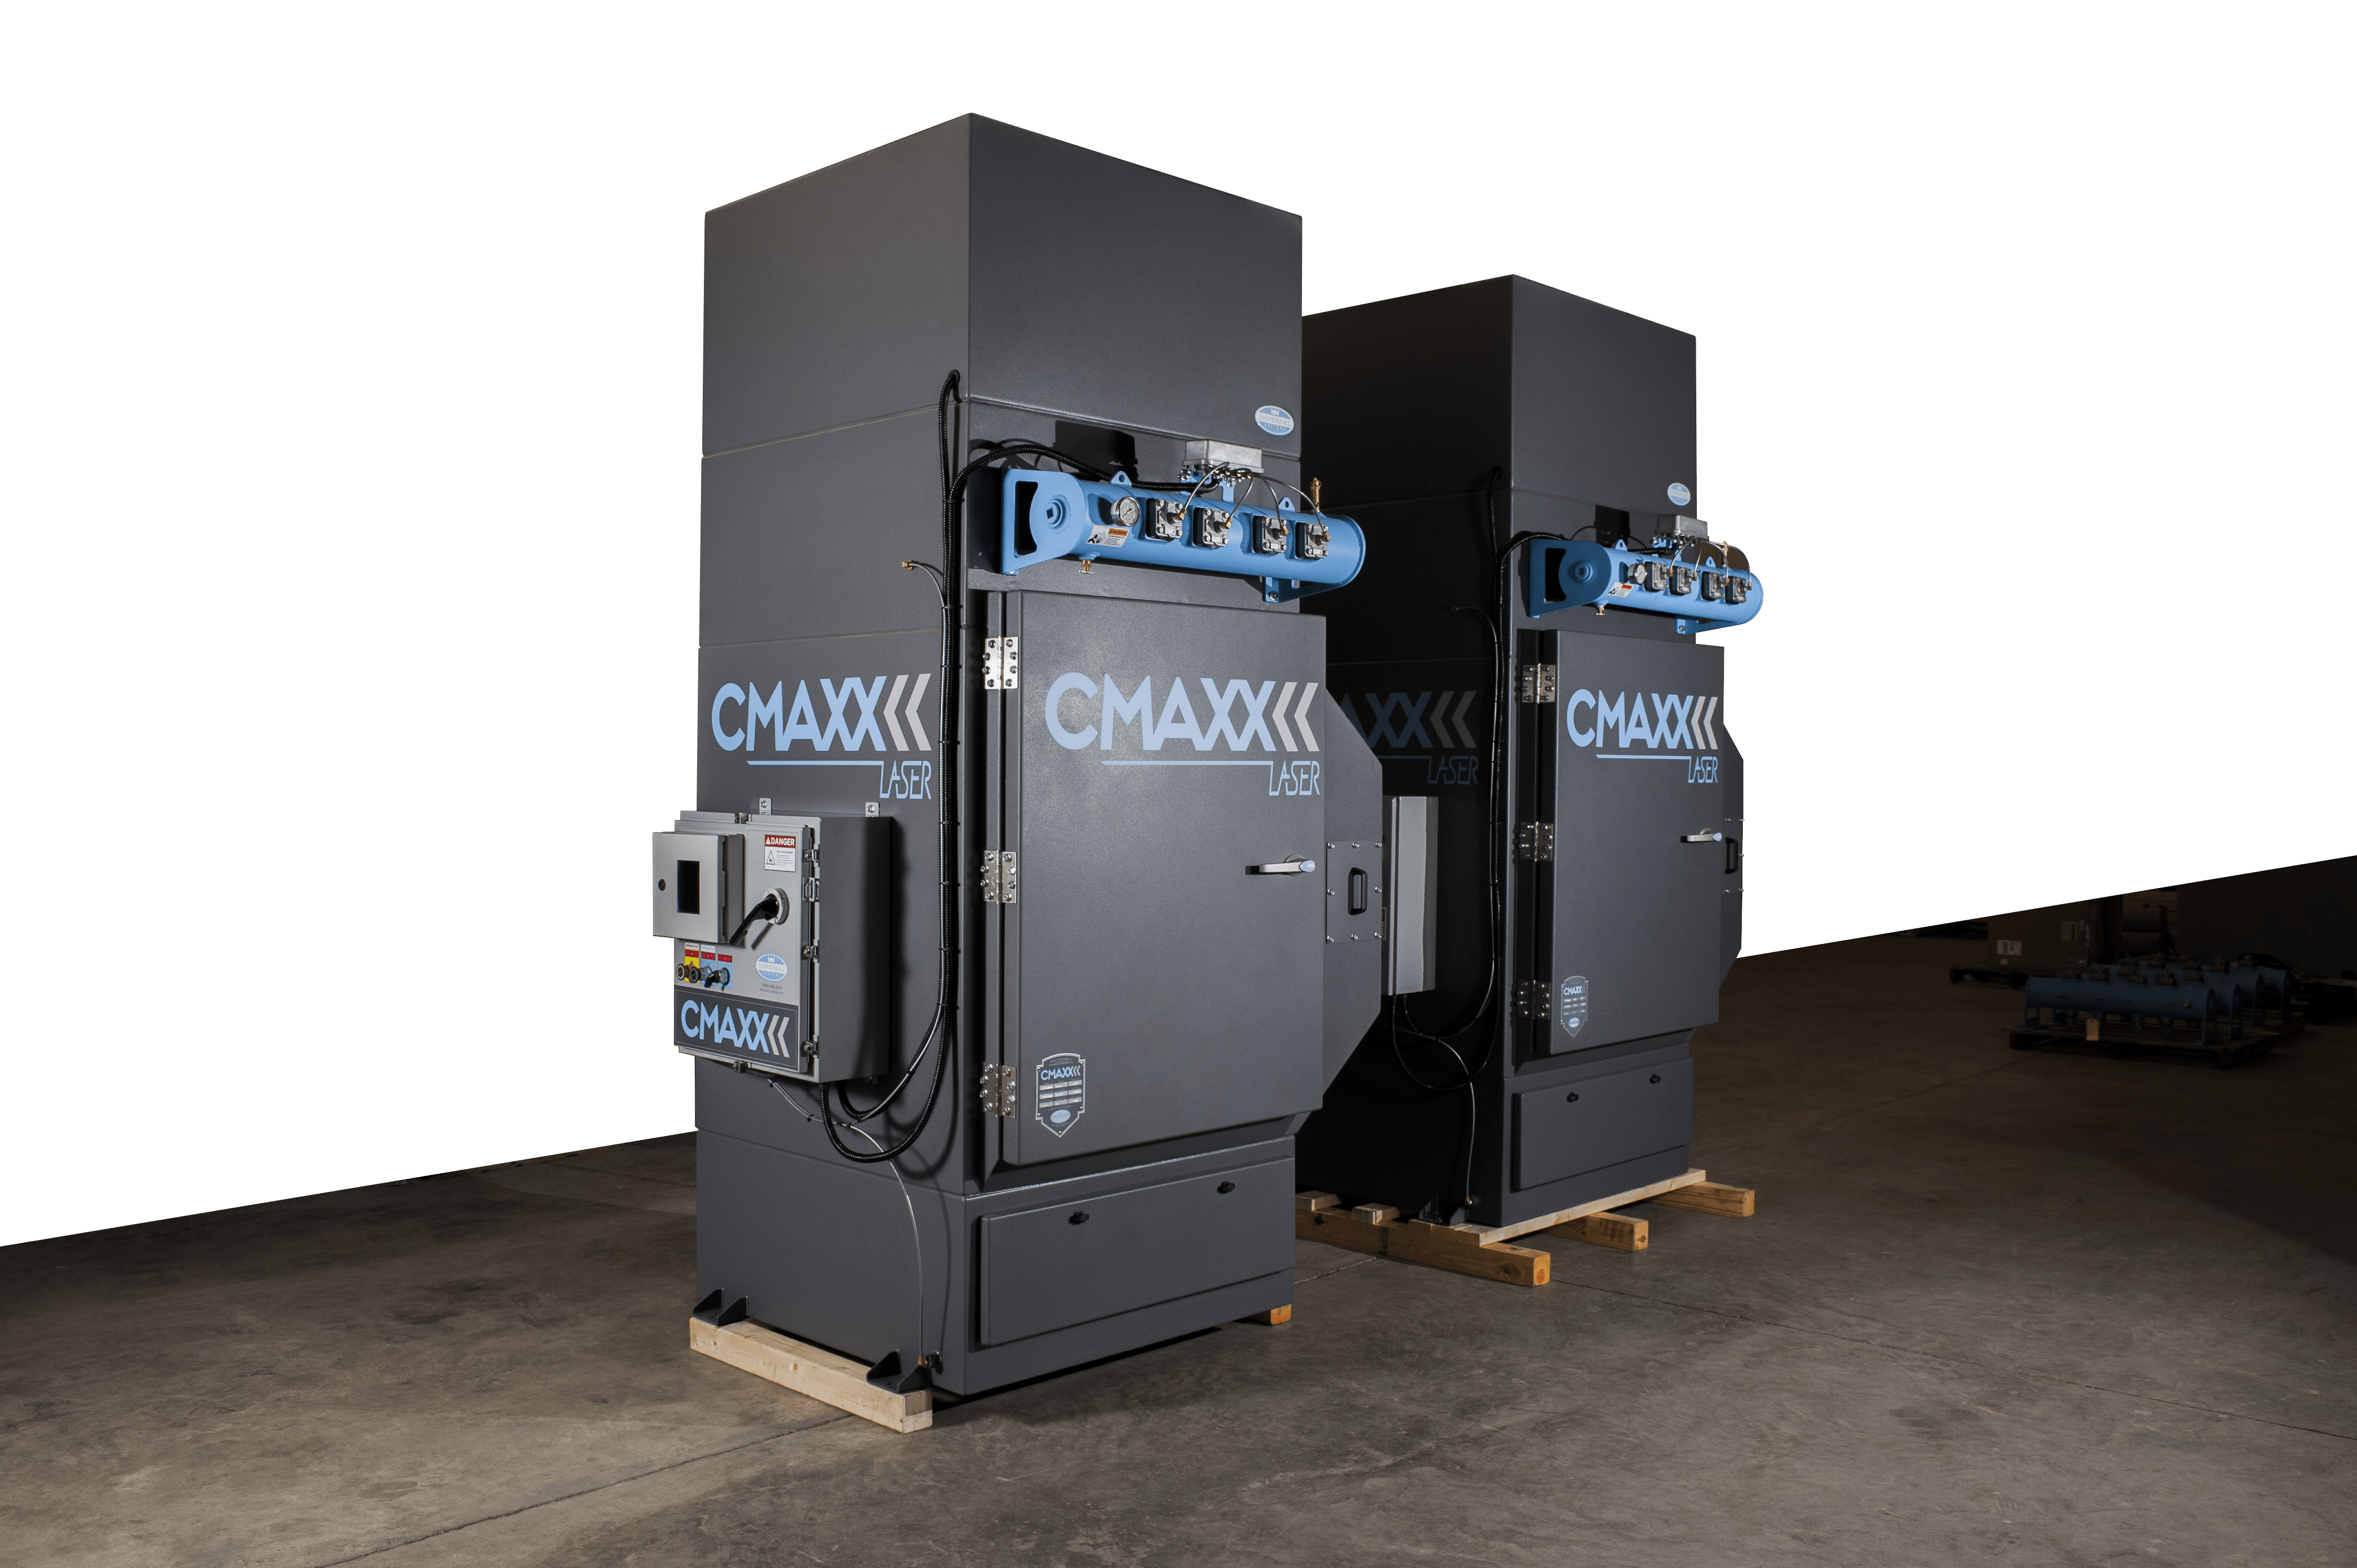 CMAXX Laser fume extractor system for CNC laser tables